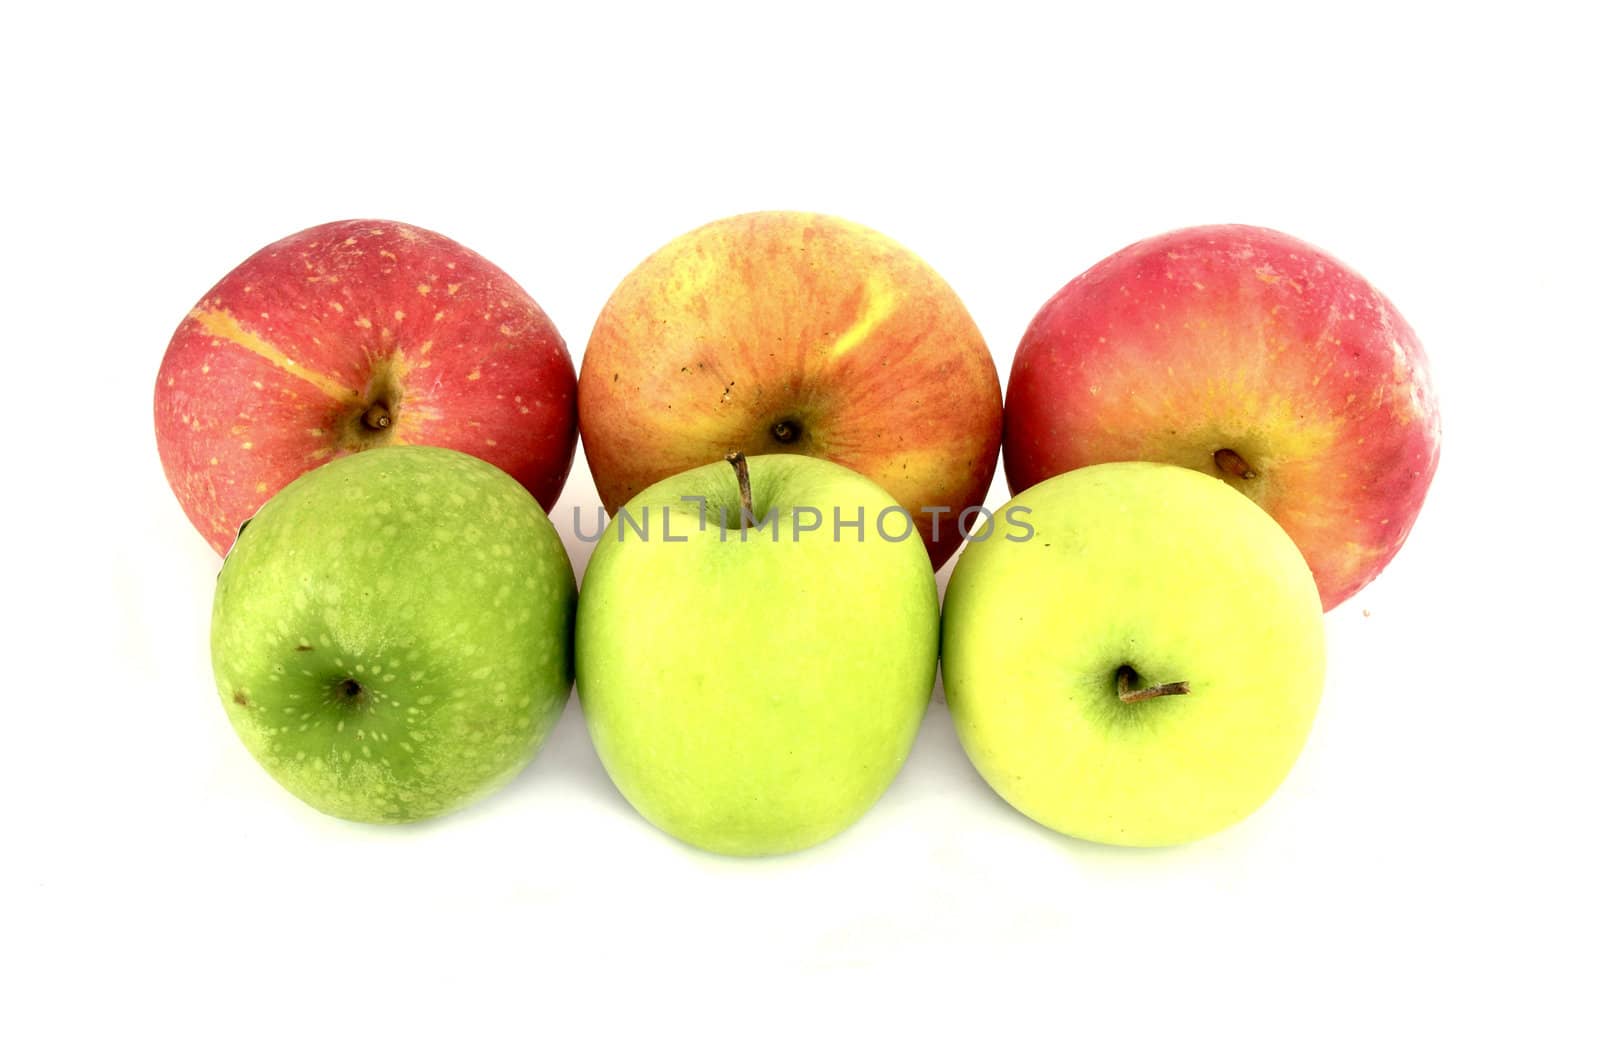 different colors apples on white background